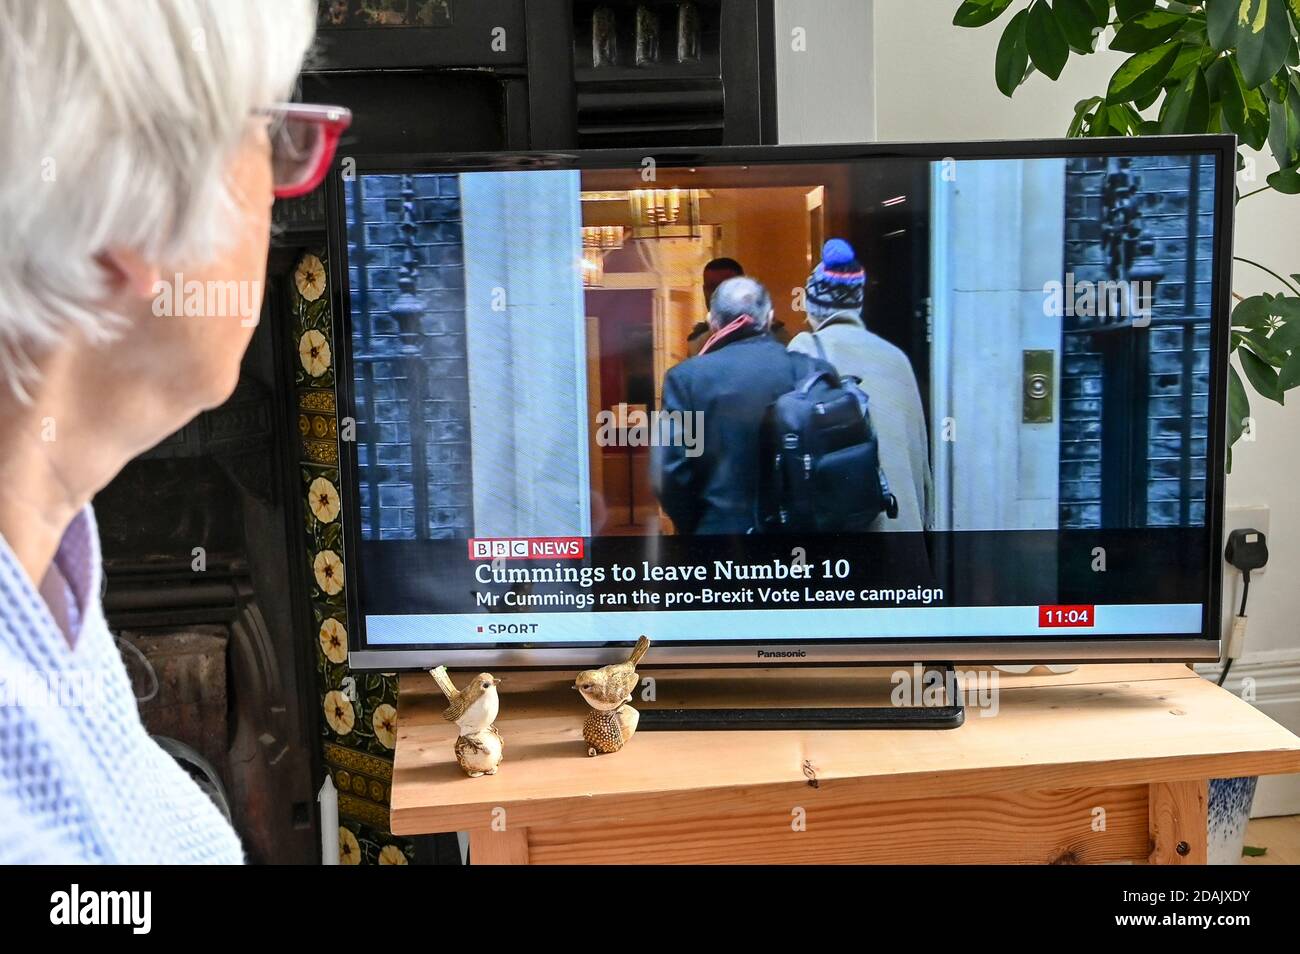 Televised news report of Dominic Cummings resigning as chief advisor to Boris Johnson with caption 'Cummings to leave Number 10', watched by a viewer. Stock Photo